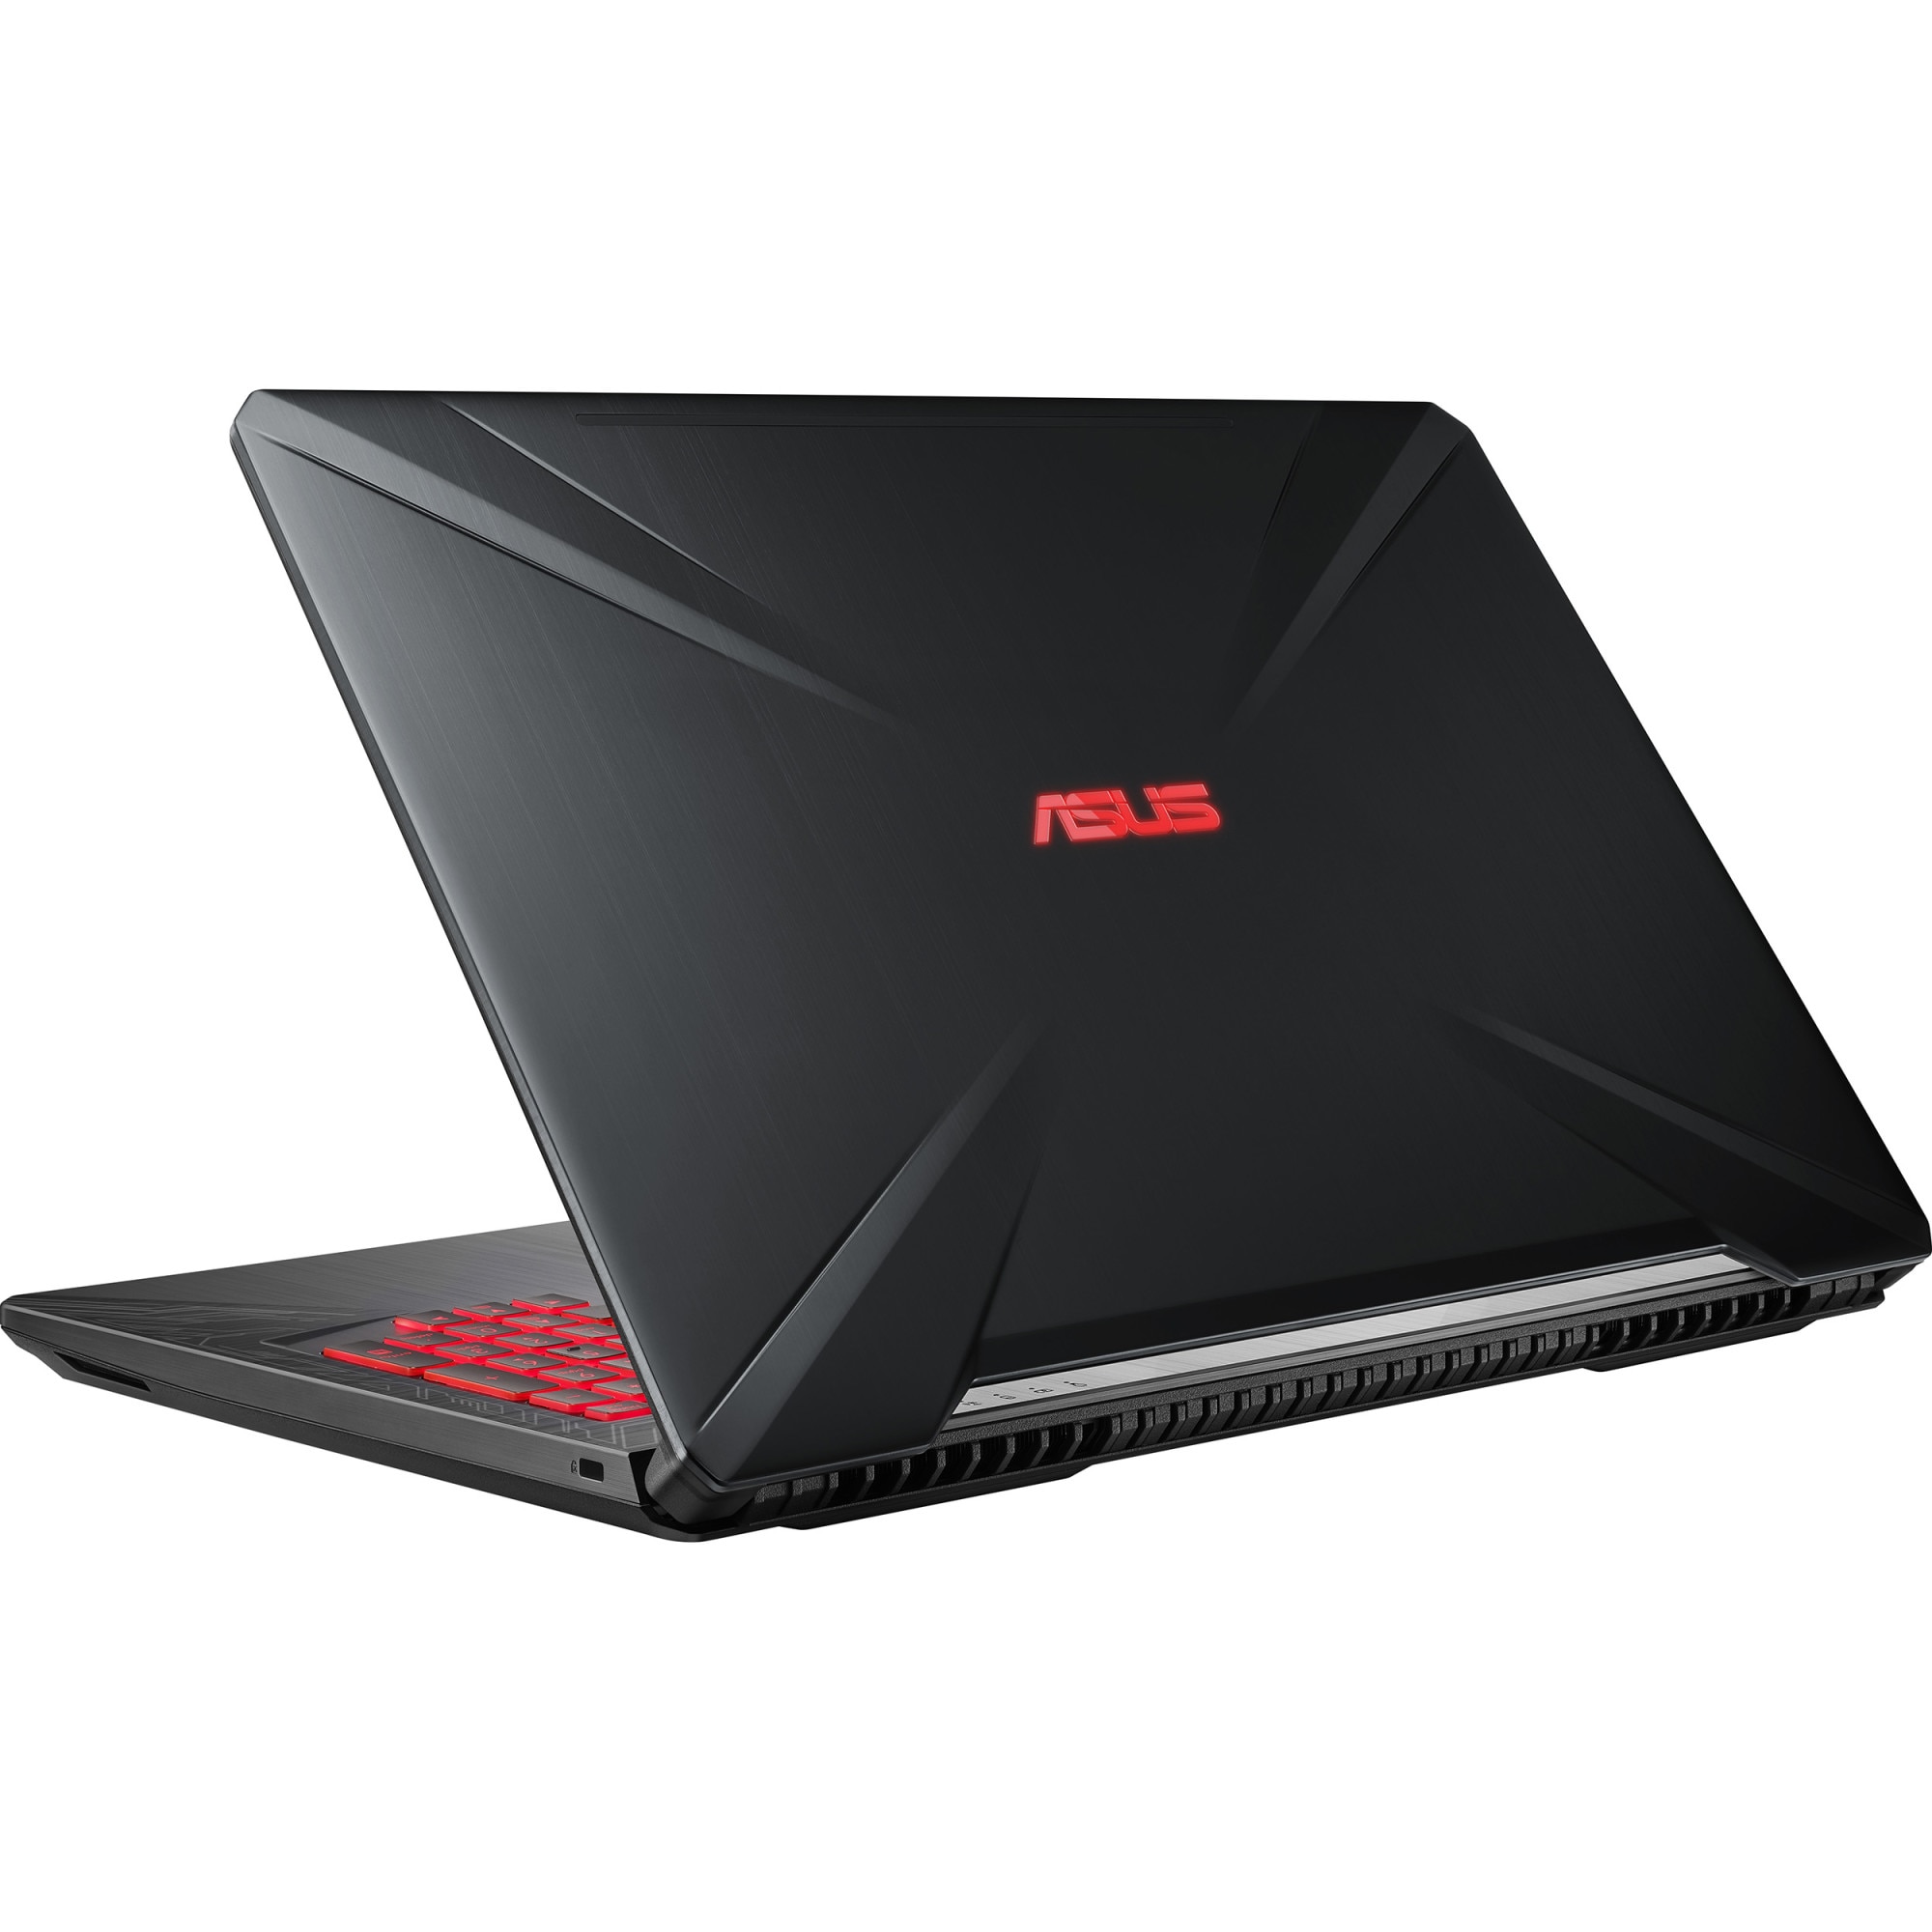 Asus game tuf fx504. ASUS TUF fx504gd. ASUS ROG fx504gd. ASUS fx504gd-e41023t. Ноутбук ASUS TUF Gaming fx504.